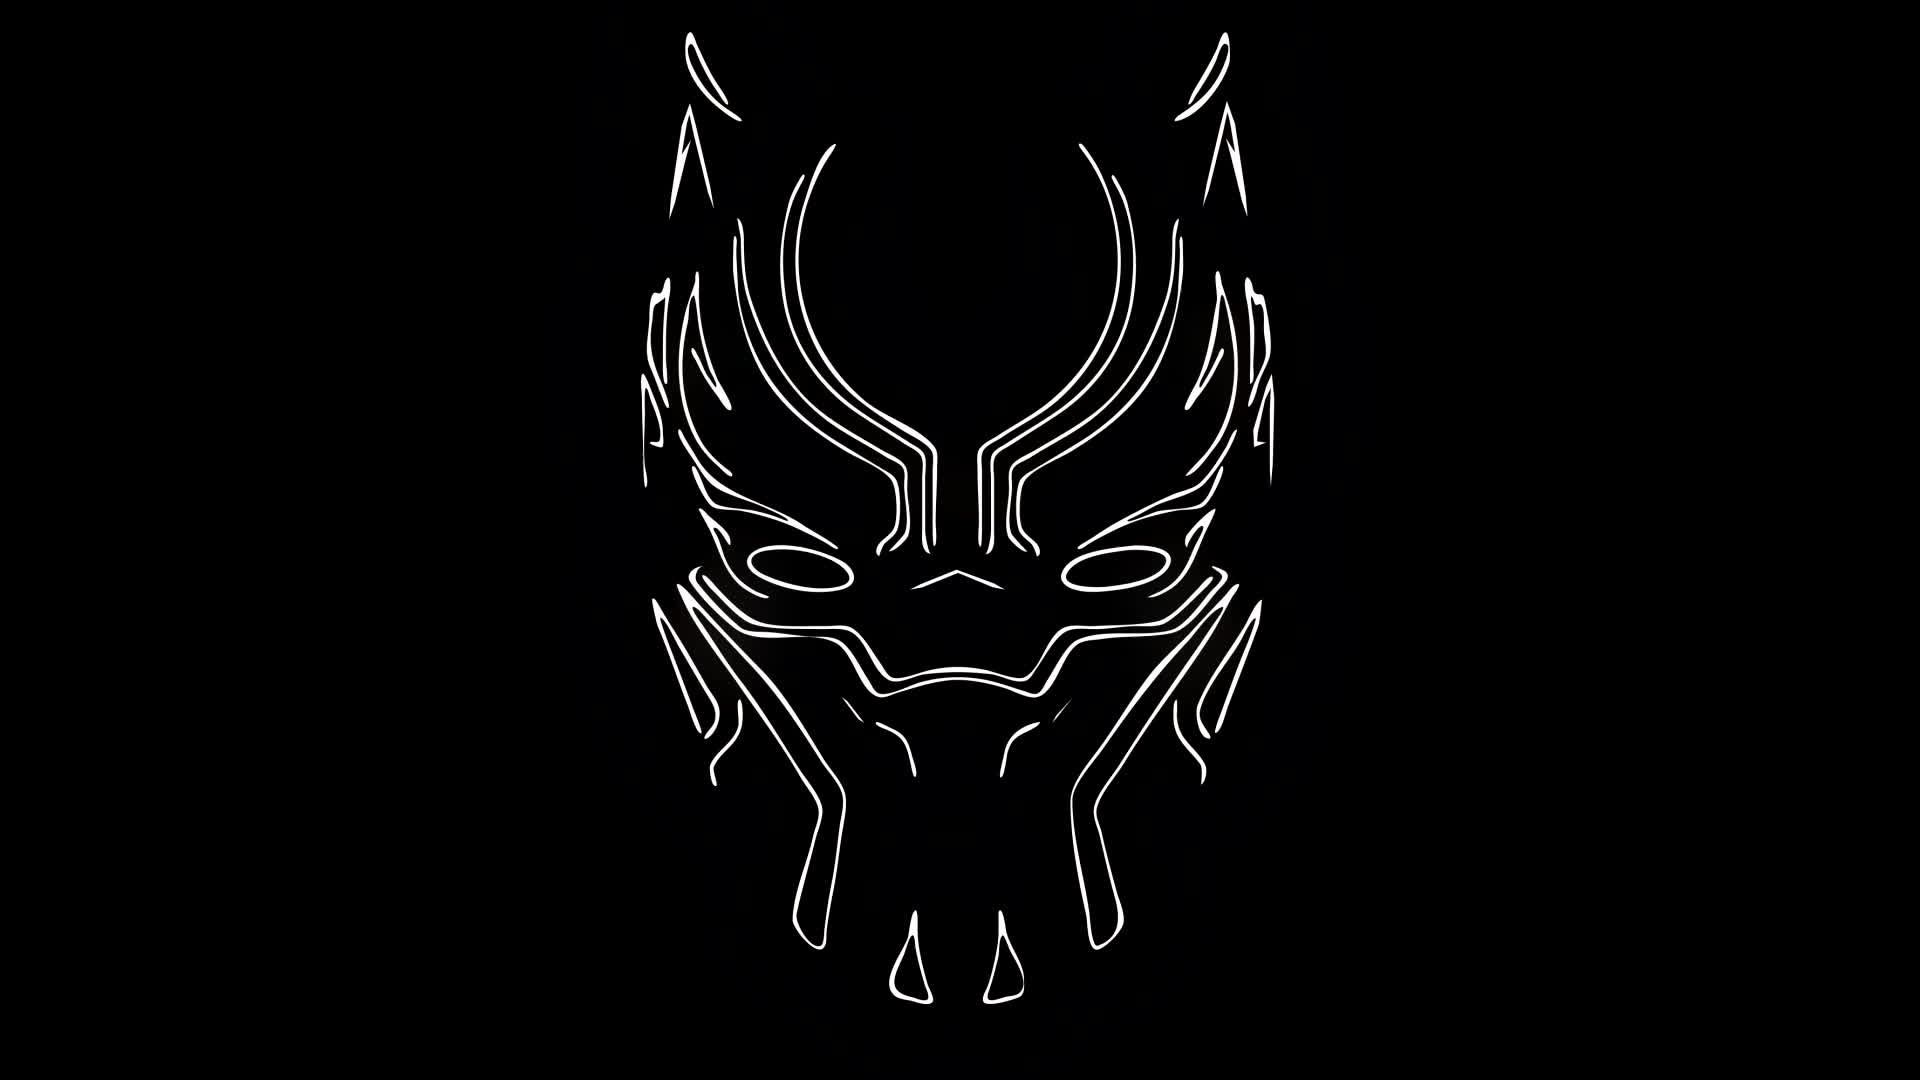 Black Panther Superhero Poster Wallpaper with high-resolution 1920x1080 pixel. You can use this poster wallpaper for your Desktop Computers, Mac Screensavers, Windows Backgrounds, iPhone Wallpapers, Tablet or Android Lock screen and another Mobile device